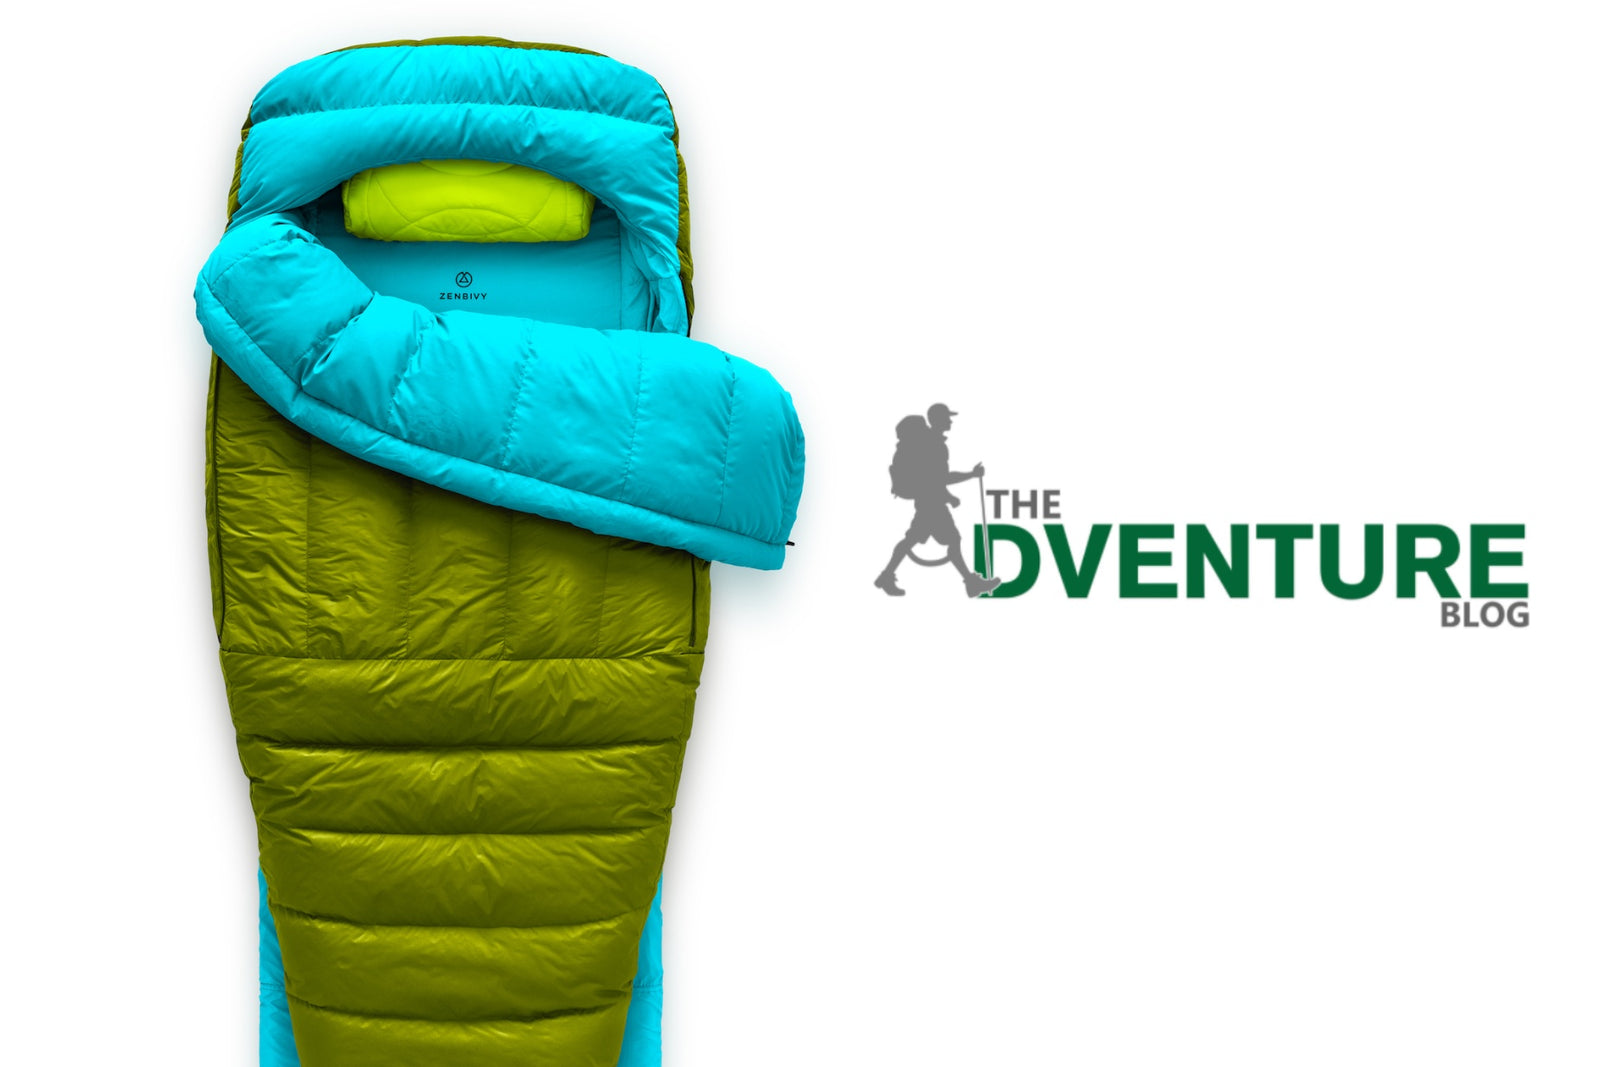 PRESS: The Adventure Blog's take on the new Zenbivy Bed features